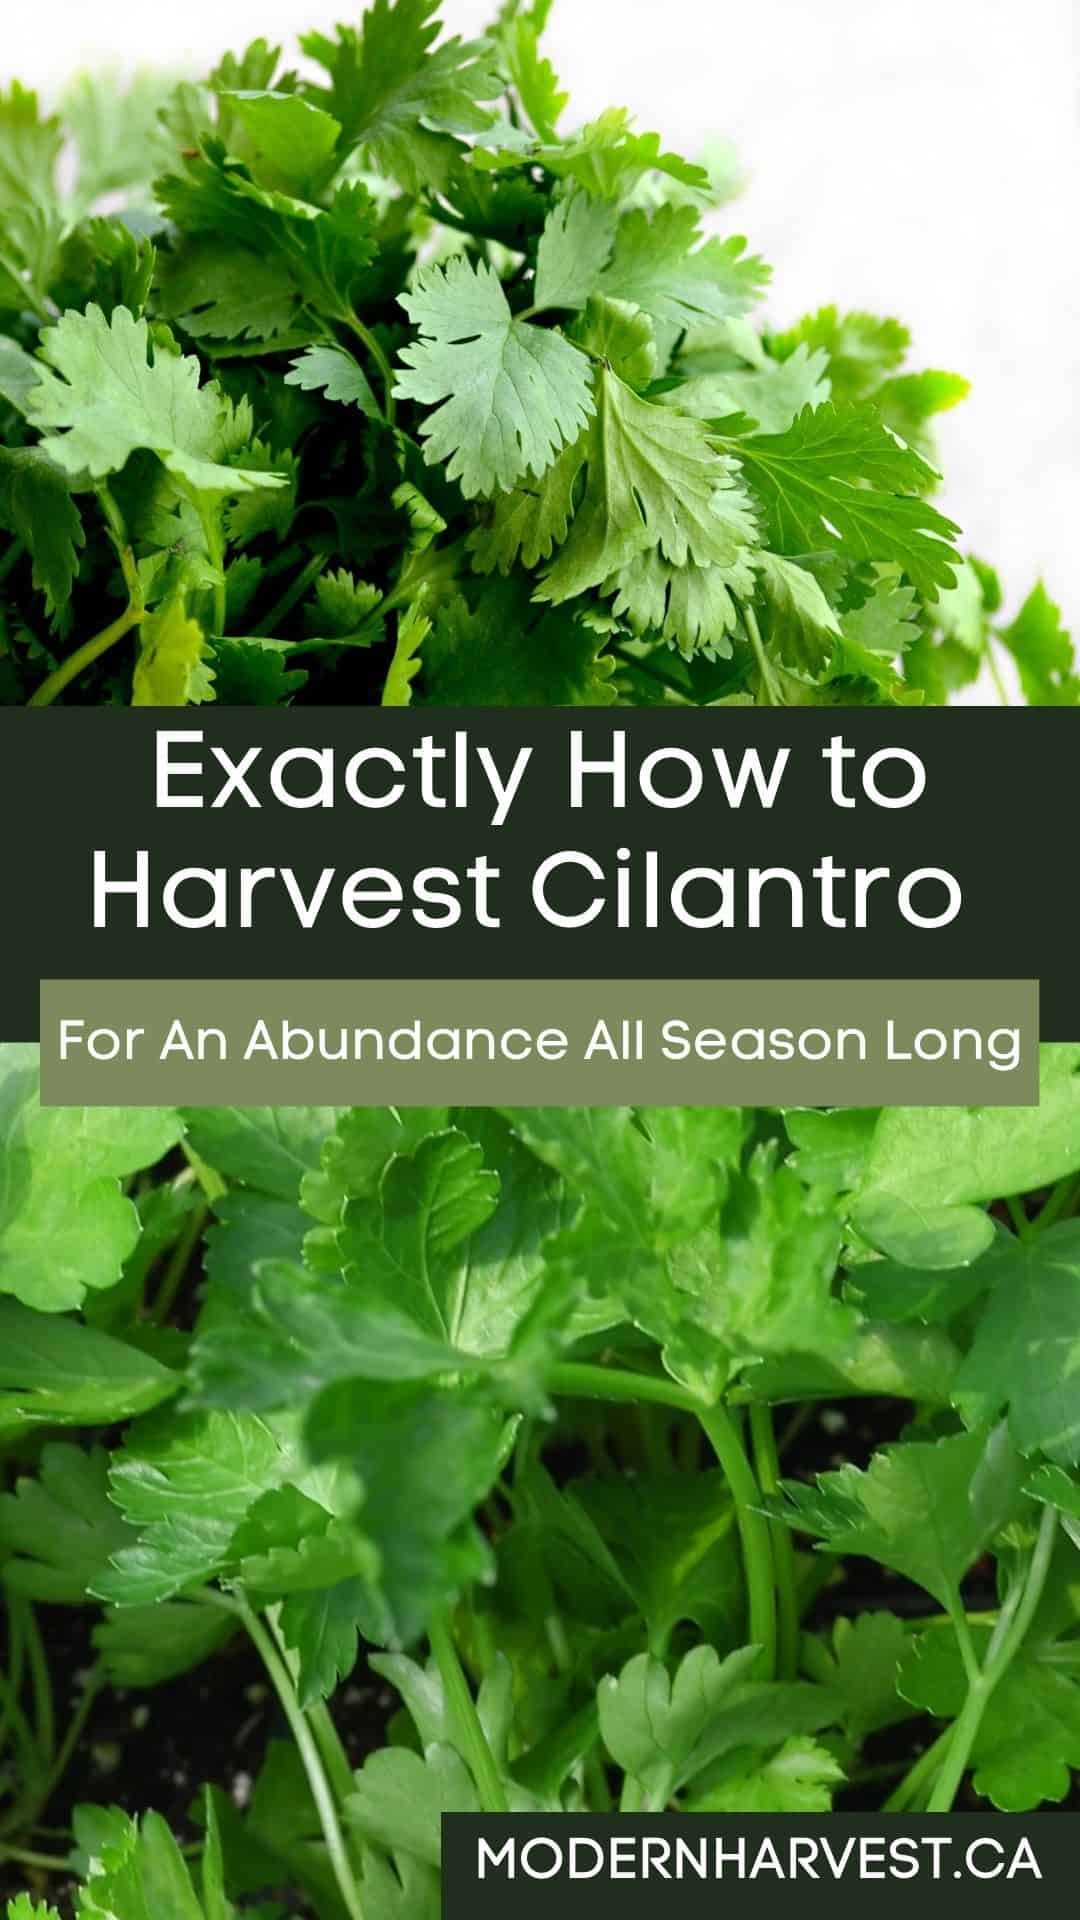 How to harvest cilantro pinterest image showing a closeup of green cilantro leaves.